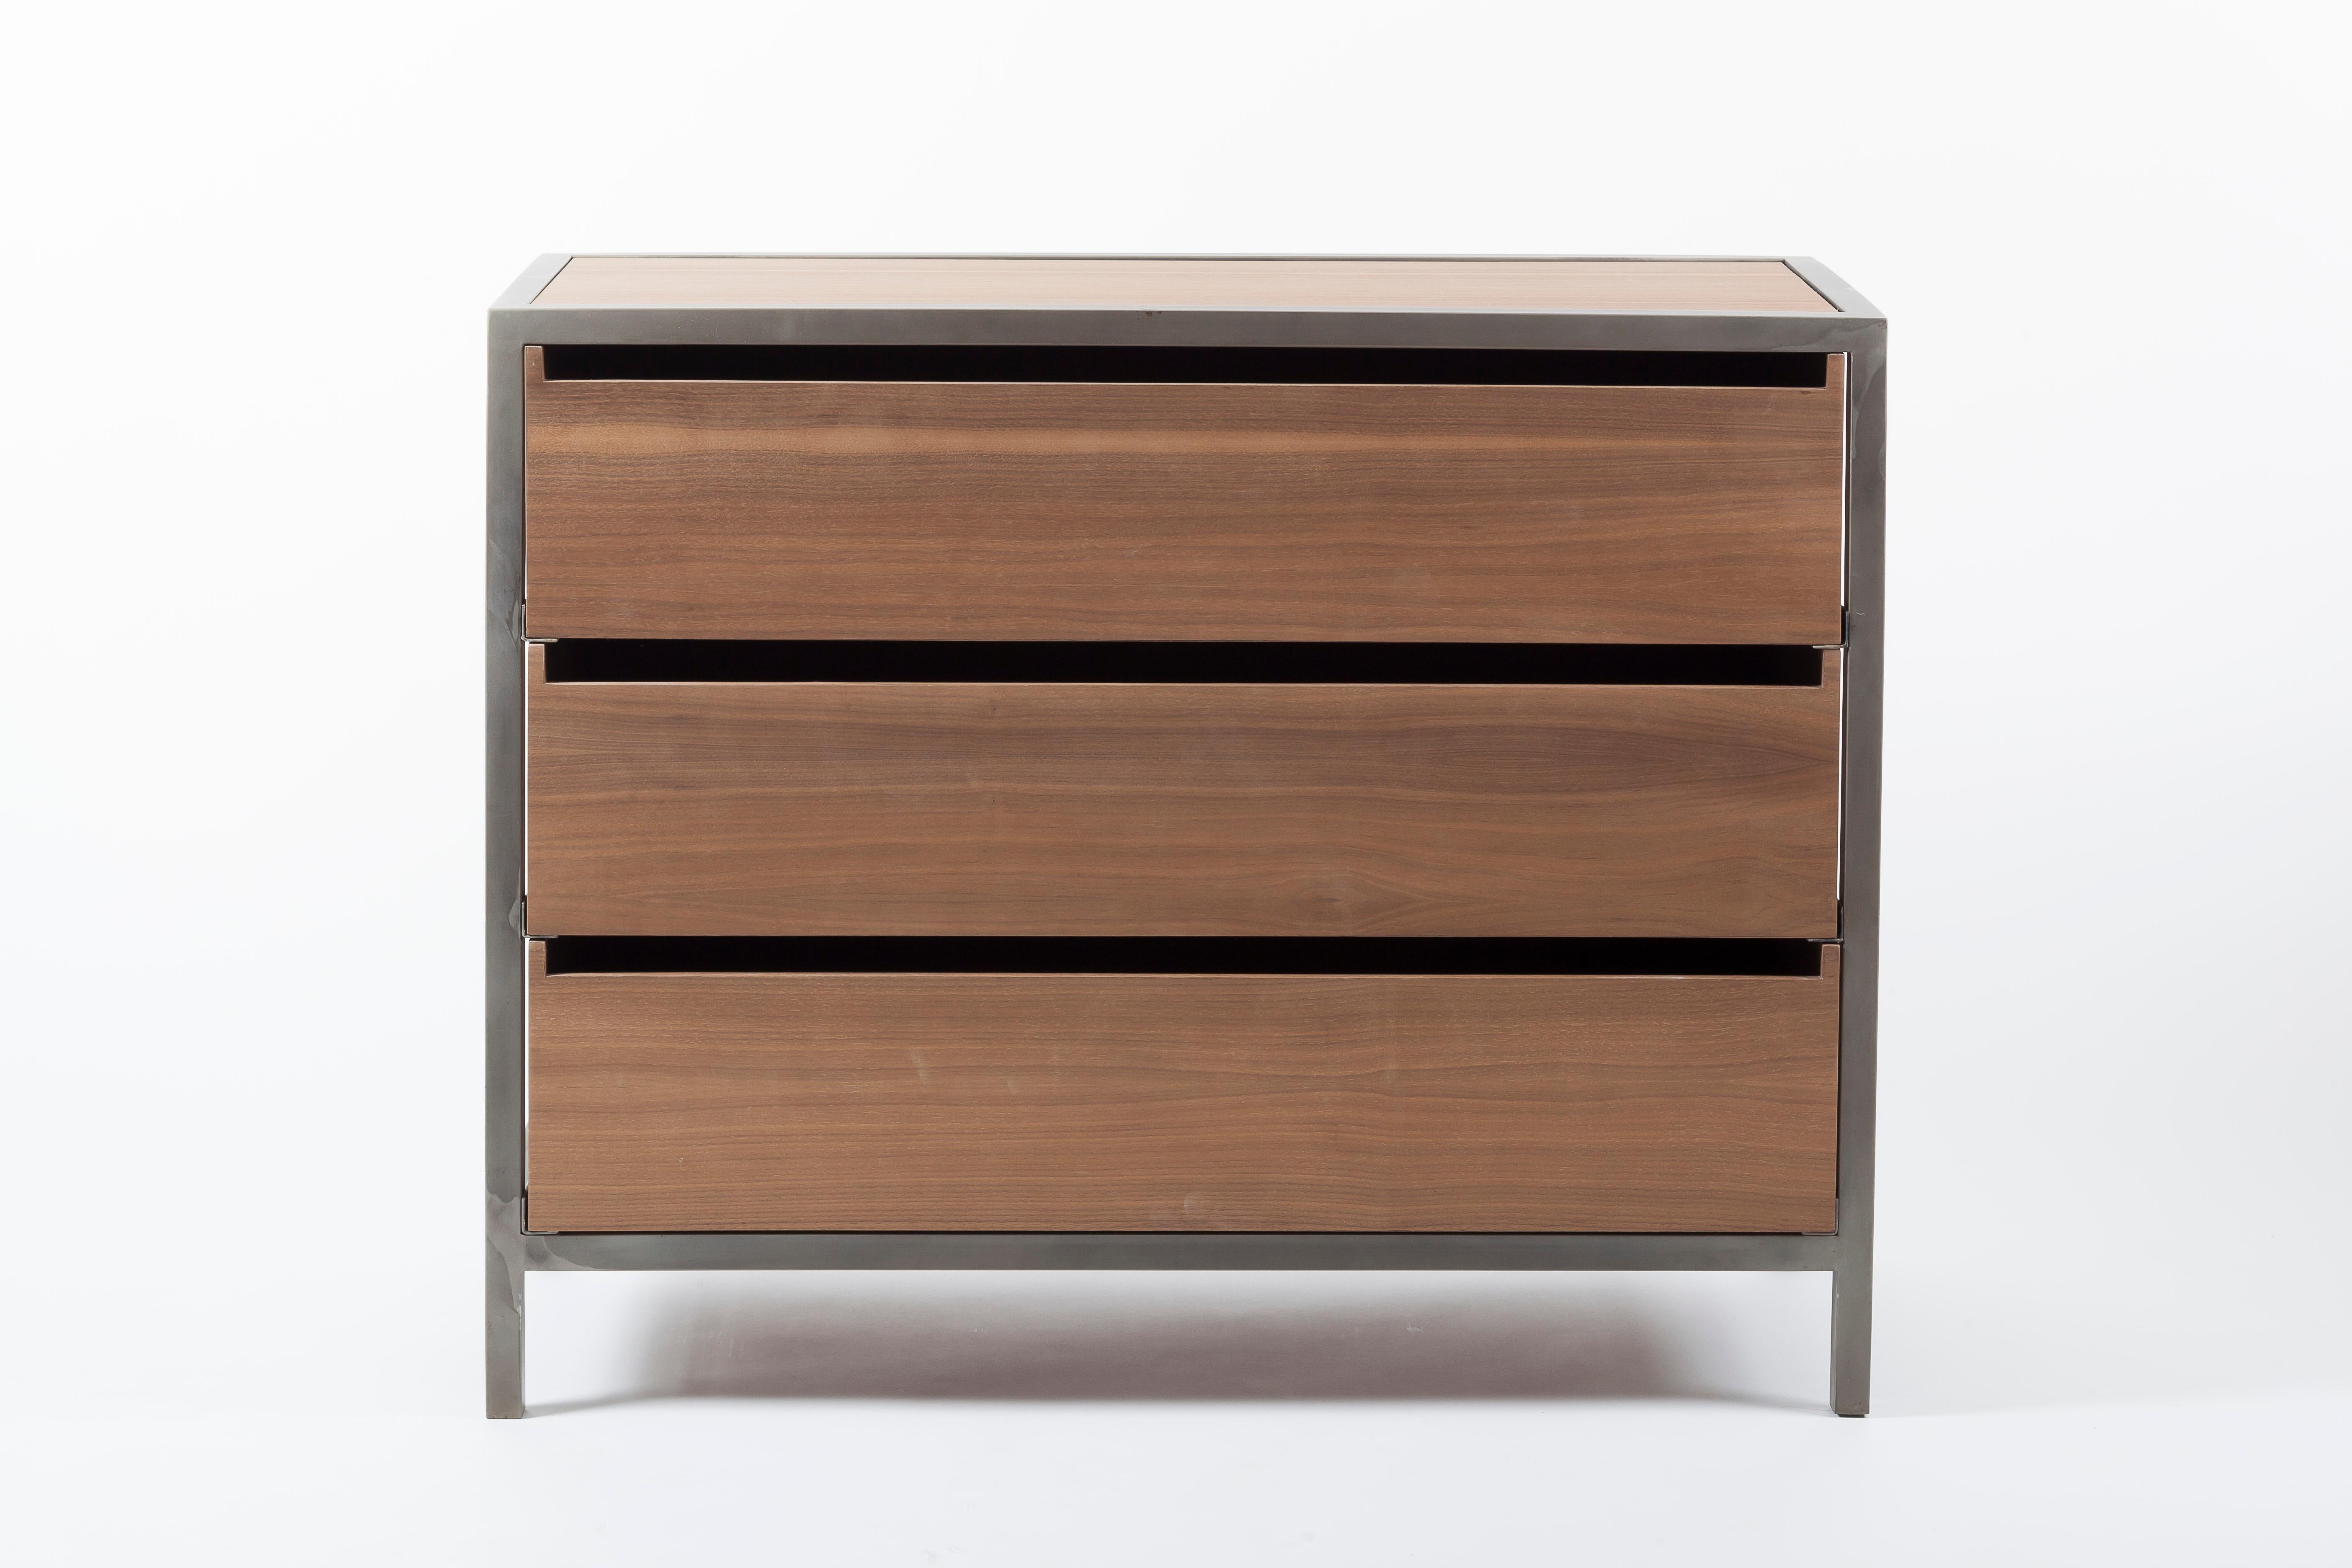 The Vaneau Chest consists of three beautiful veneered drawers, hand made from beech plywood, that slide into a hand-polished and hand welded steel frame. The drawers are hand veneered with oak or american walnut, from FSC certified european forests.